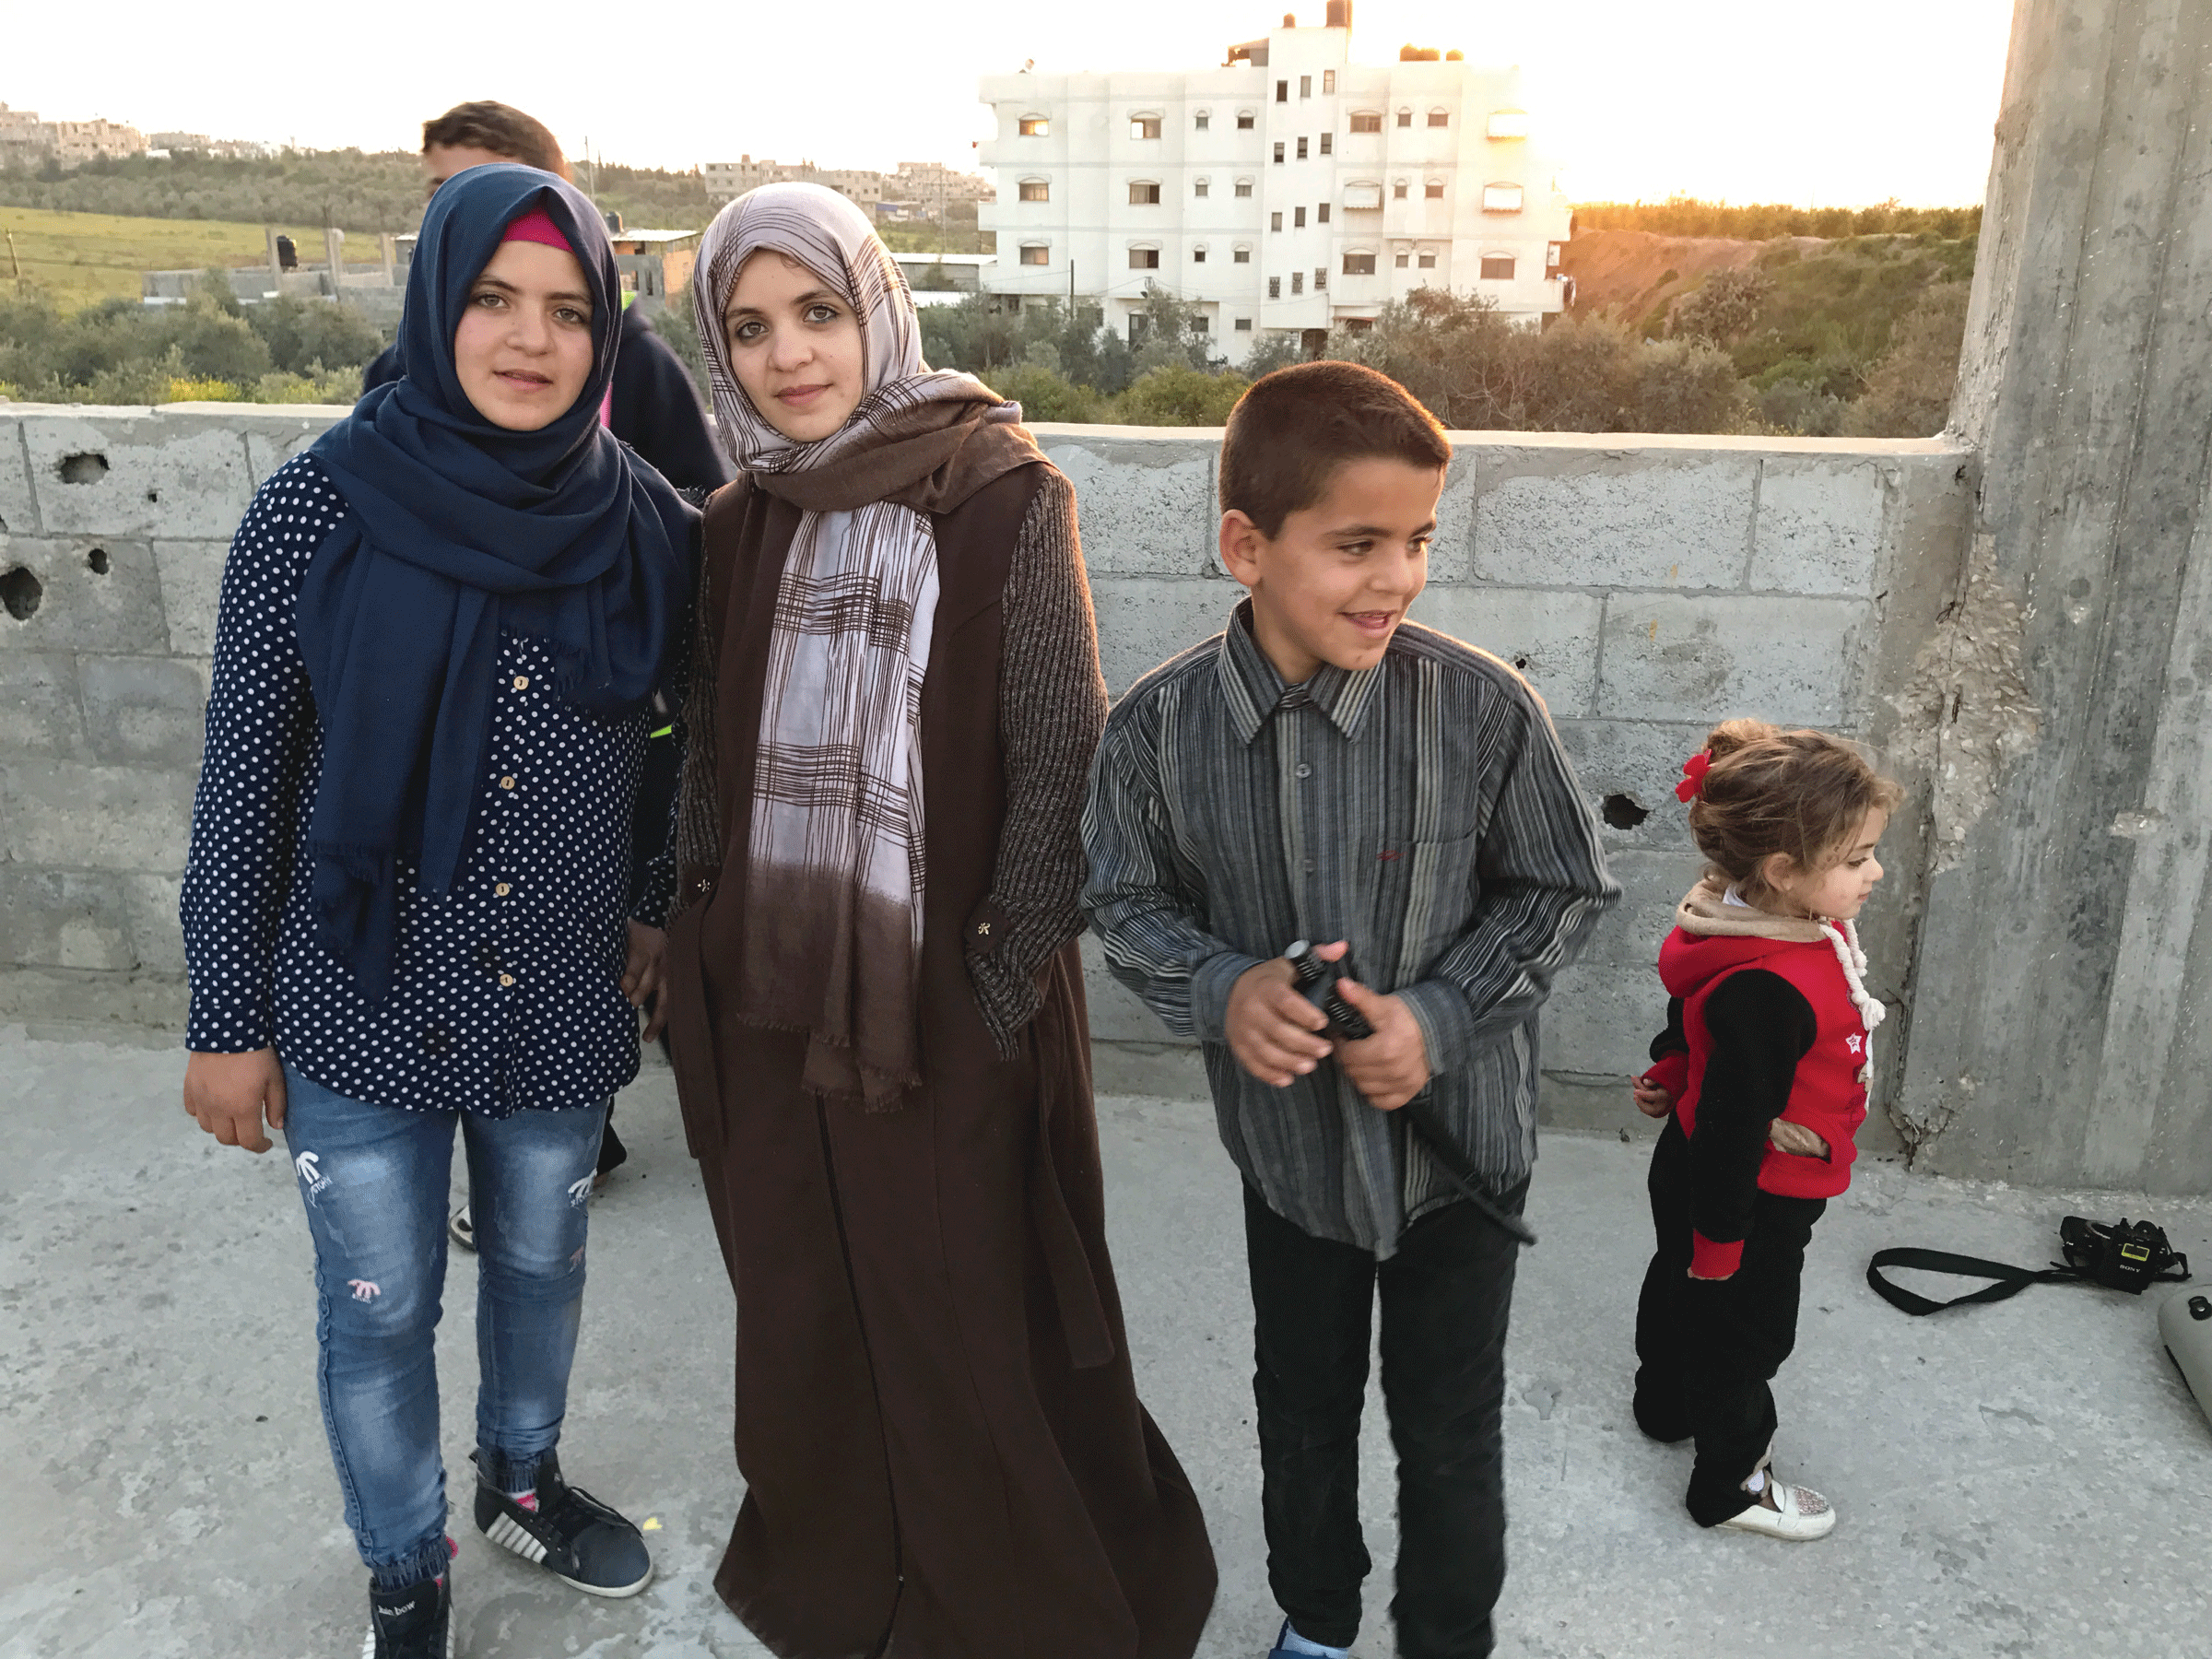 The Husam Family lives directly in the flight path of Israeli rockets. (America Media staff)